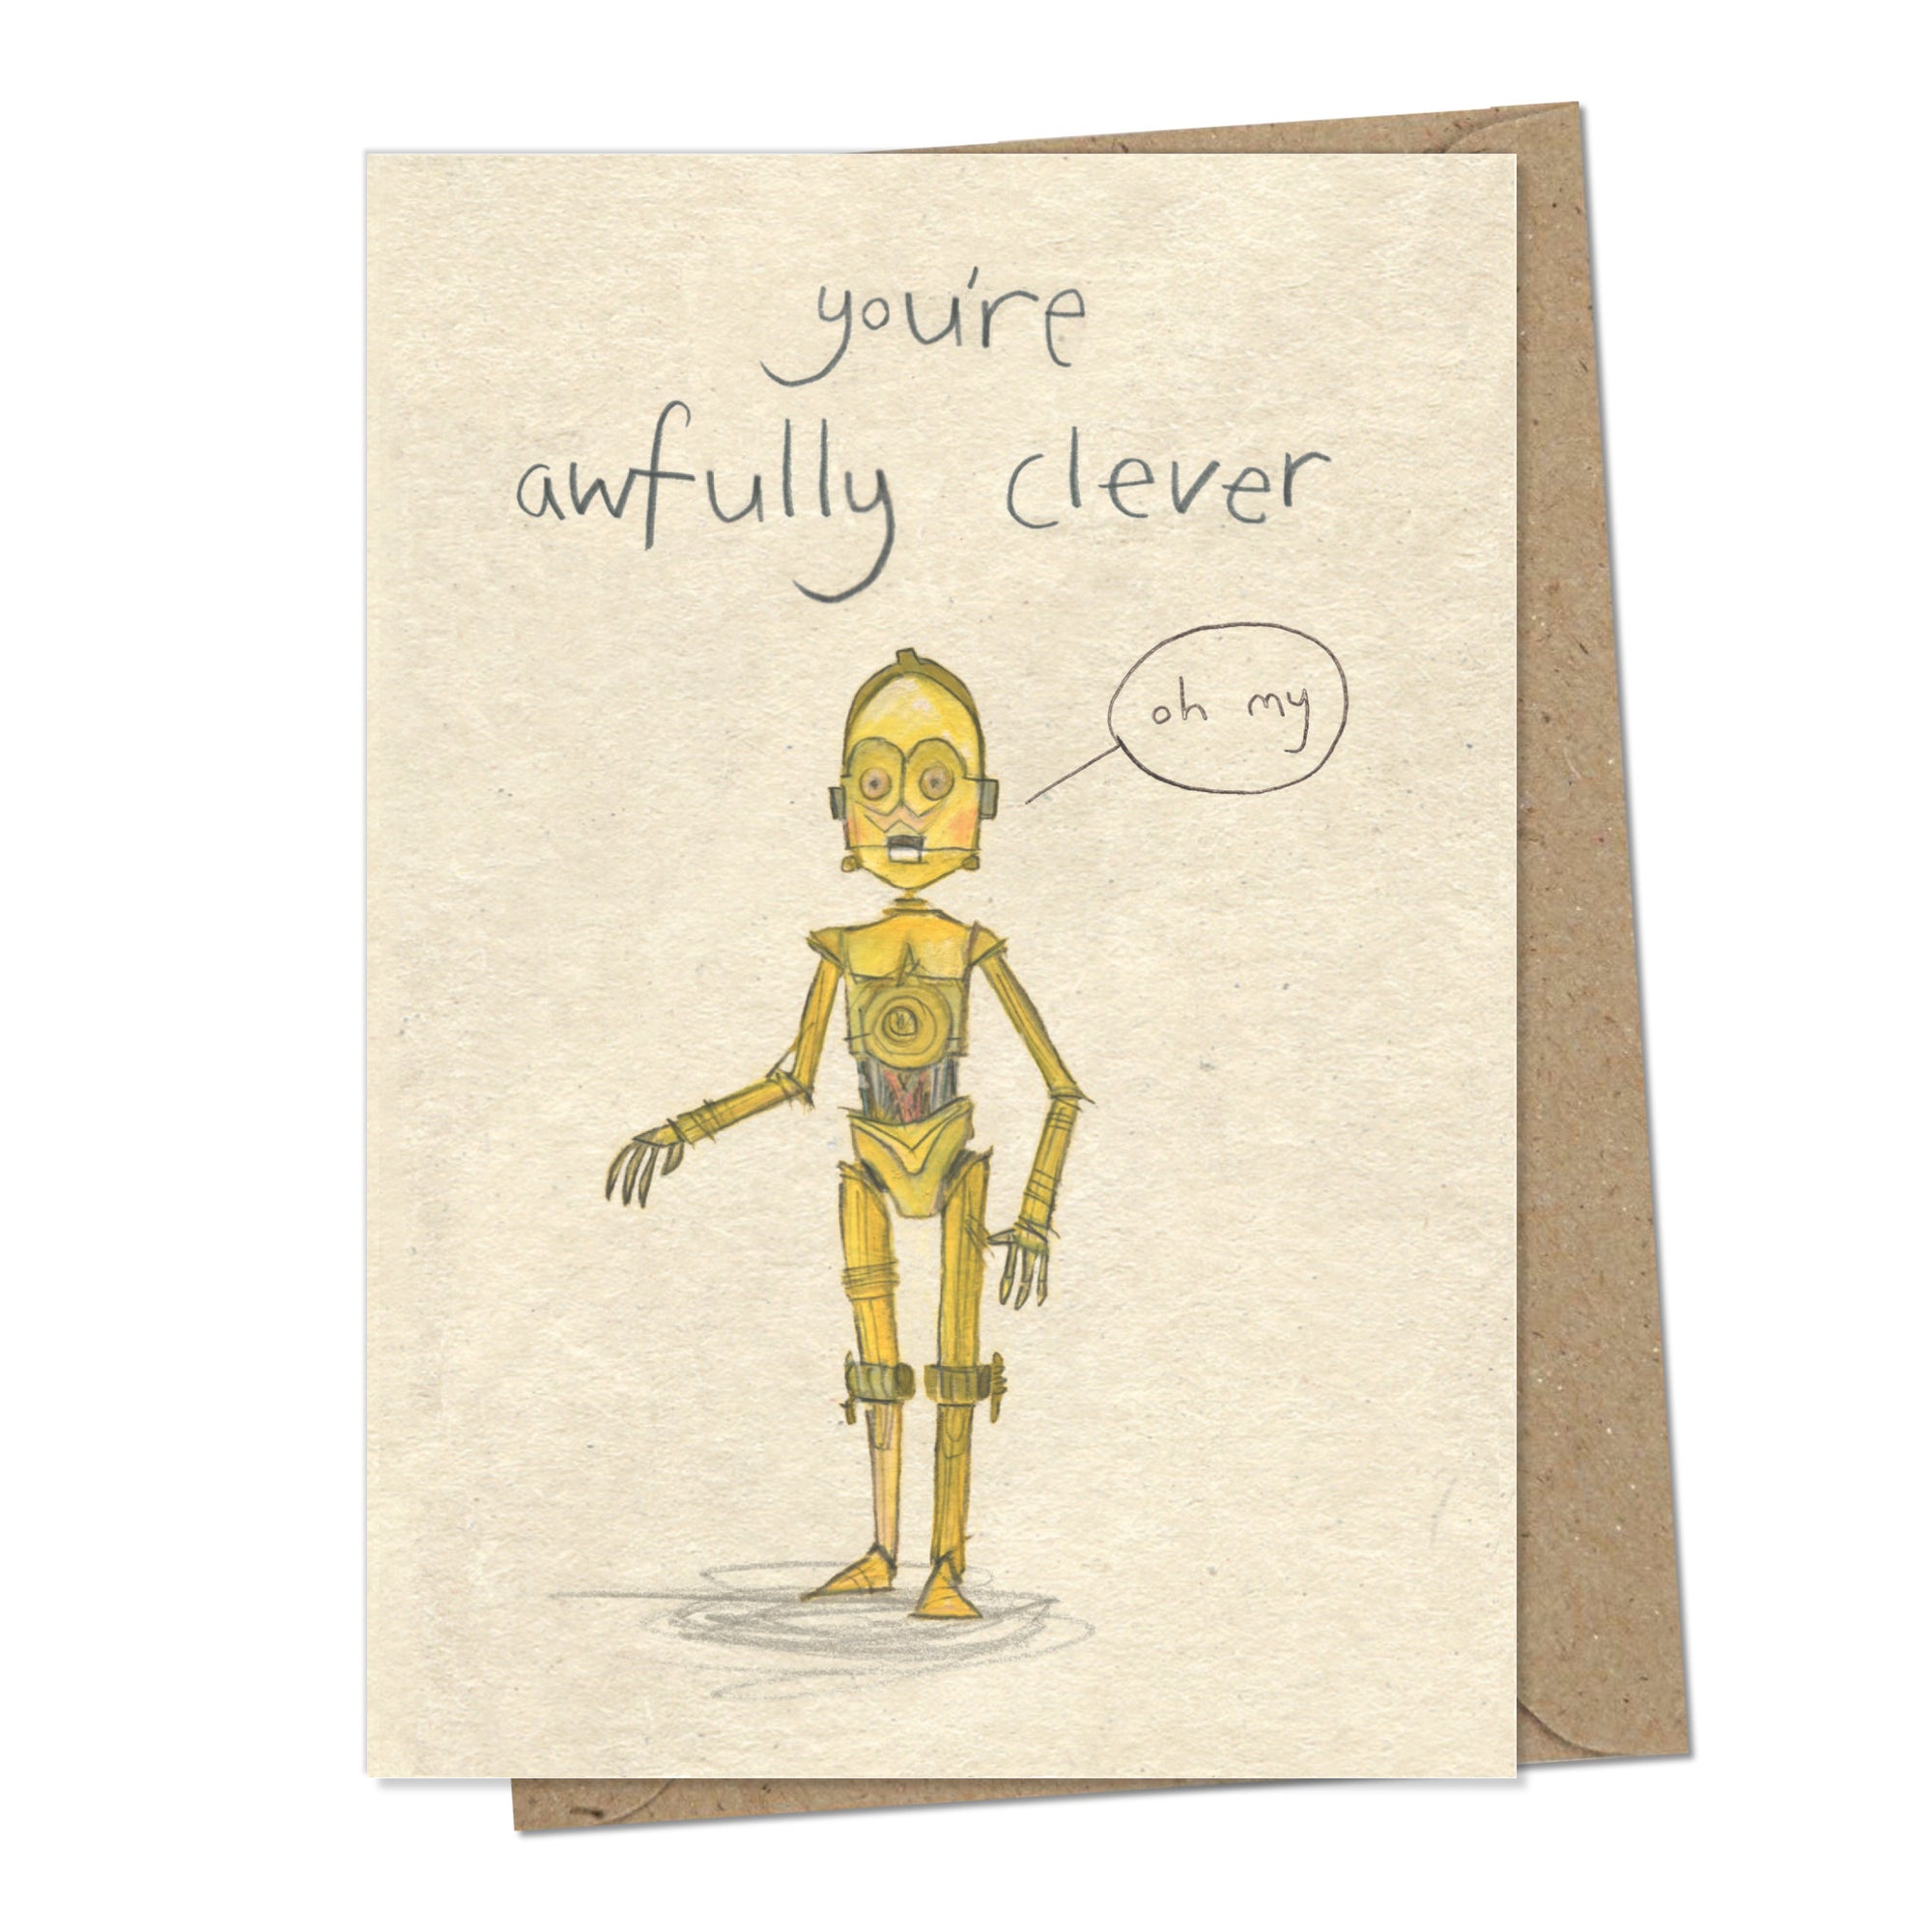 A greetings card with a beige mottled background with handwriting above an illustration stating 'you're awfully clever'. The illustration is of R2D2 from the movie Star Wars. It is a a gold robot looking surprised with the speech bubble 'oh my'.